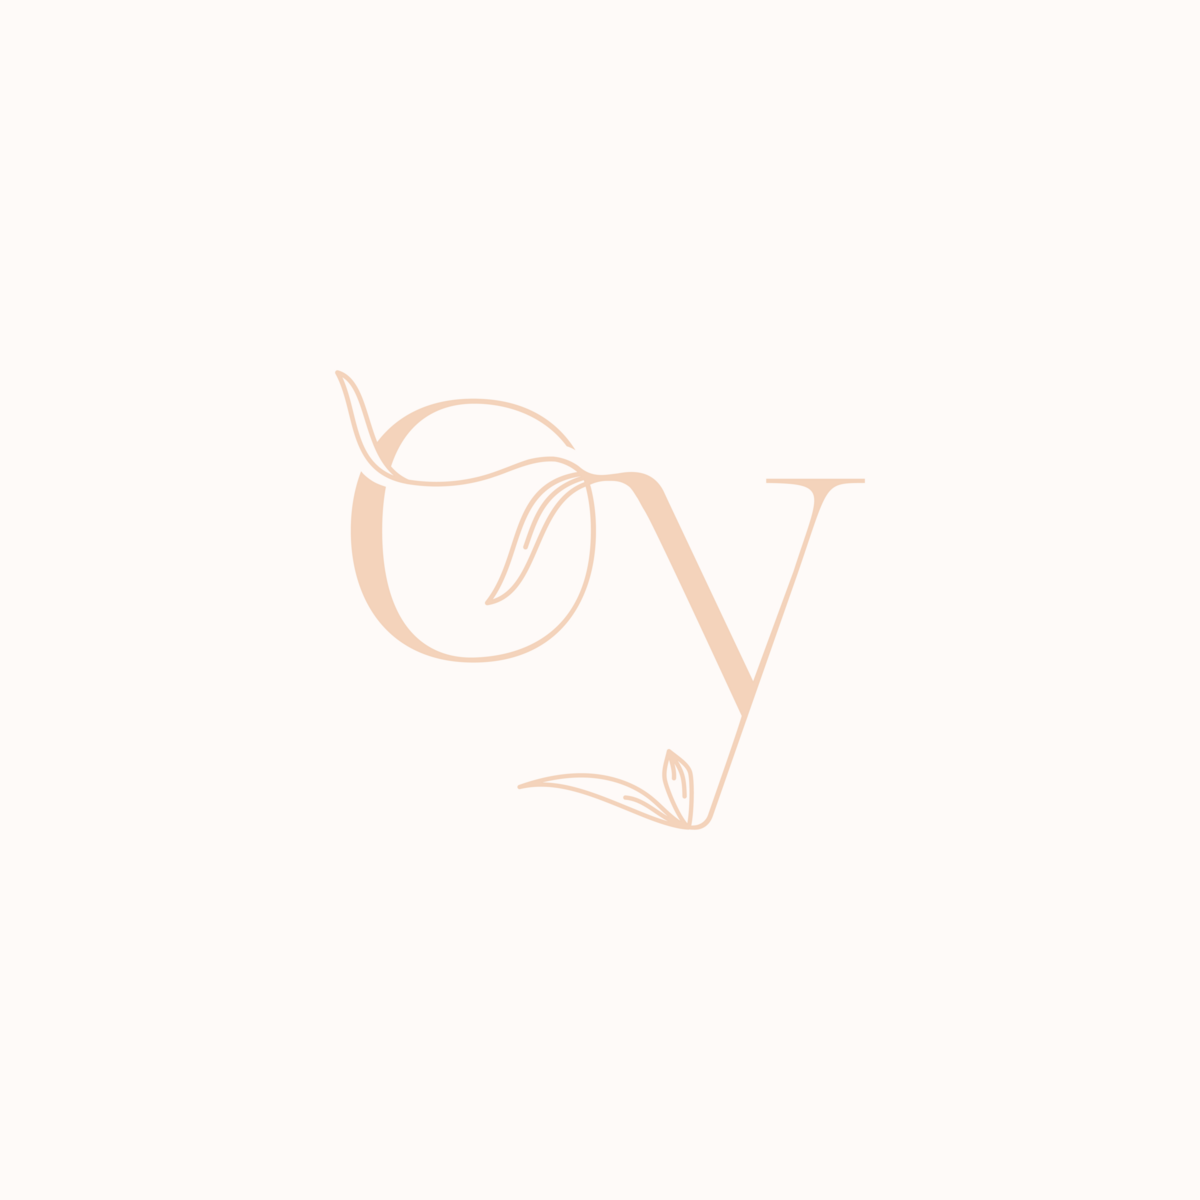 Oy Photography Logos by 315 Design-01